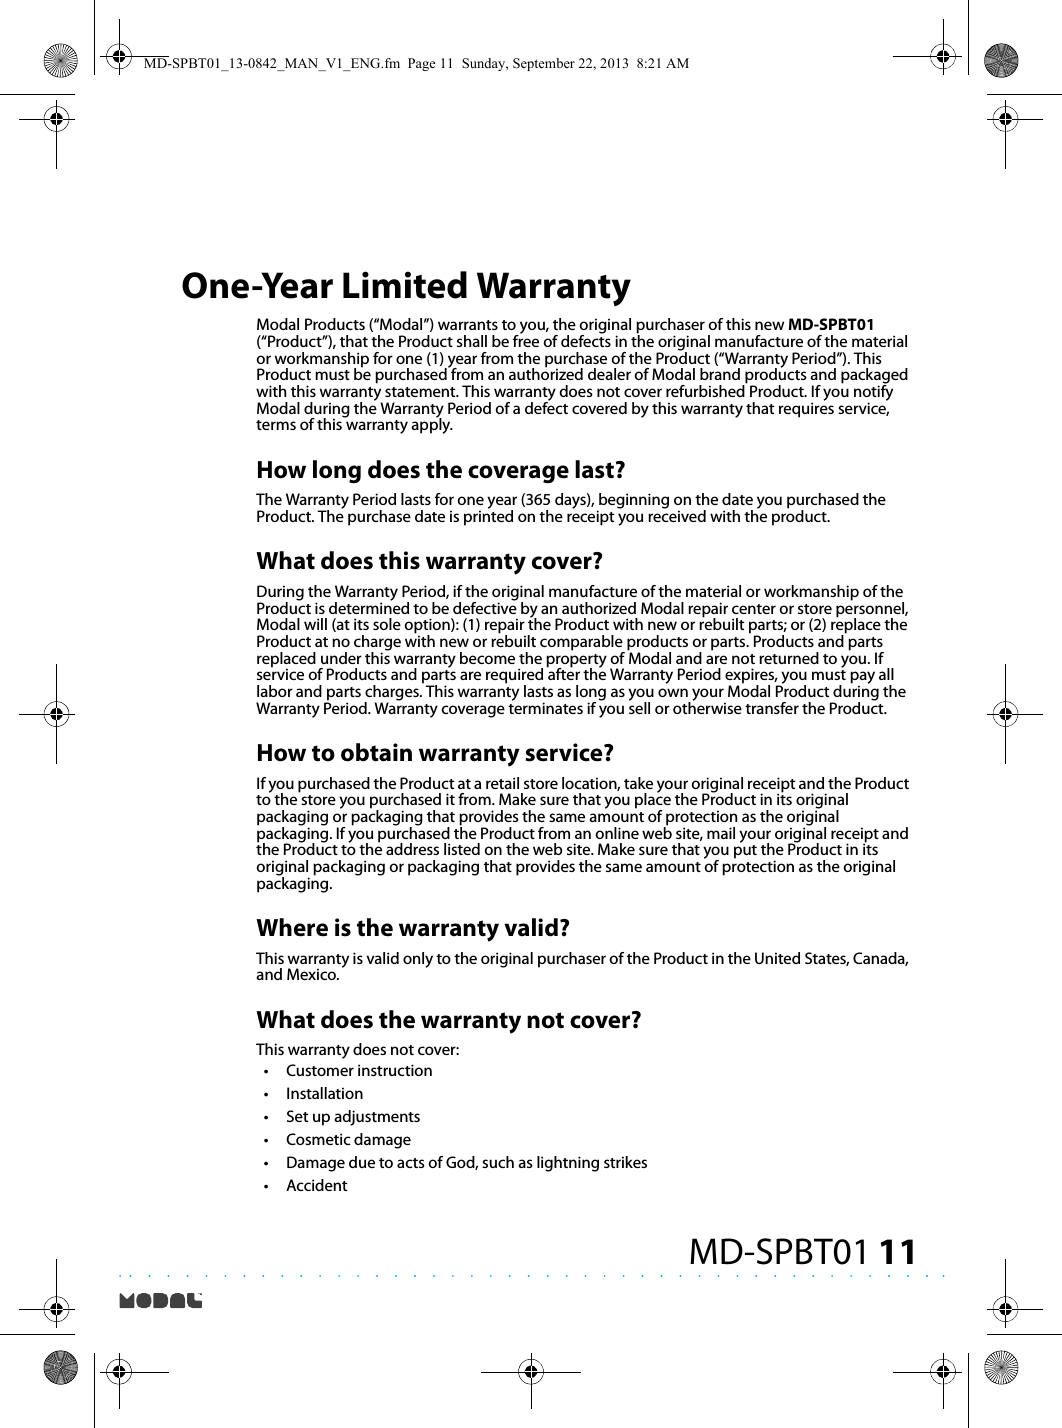 11MD-SPBT01One-Year Limited WarrantyModal Products (“Modal”) warrants to you, the original purchaser of this new MD-SPBT01 (“Product”), that the Product shall be free of defects in the original manufacture of the material or workmanship for one (1) year from the purchase of the Product (“Warranty Period”). This Product must be purchased from an authorized dealer of Modal brand products and packaged with this warranty statement. This warranty does not cover refurbished Product. If you notify Modal during the Warranty Period of a defect covered by this warranty that requires service, terms of this warranty apply.How long does the coverage last?The Warranty Period lasts for one year (365 days), beginning on the date you purchased the Product. The purchase date is printed on the receipt you received with the product.What does this warranty cover?During the Warranty Period, if the original manufacture of the material or workmanship of the Product is determined to be defective by an authorized Modal repair center or store personnel, Modal will (at its sole option): (1) repair the Product with new or rebuilt parts; or (2) replace the Product at no charge with new or rebuilt comparable products or parts. Products and parts replaced under this warranty become the property of Modal and are not returned to you. If service of Products and parts are required after the Warranty Period expires, you must pay all labor and parts charges. This warranty lasts as long as you own your Modal Product during the Warranty Period. Warranty coverage terminates if you sell or otherwise transfer the Product.How to obtain warranty service?If you purchased the Product at a retail store location, take your original receipt and the Product to the store you purchased it from. Make sure that you place the Product in its original packaging or packaging that provides the same amount of protection as the original packaging. If you purchased the Product from an online web site, mail your original receipt and the Product to the address listed on the web site. Make sure that you put the Product in its original packaging or packaging that provides the same amount of protection as the original packaging.Where is the warranty valid?This warranty is valid only to the original purchaser of the Product in the United States, Canada, and Mexico.What does the warranty not cover?This warranty does not cover:•Customer instruction•Installation•Set up adjustments•Cosmetic damage•Damage due to acts of God, such as lightning strikes•AccidentMD-SPBT01_13-0842_MAN_V1_ENG.fm  Page 11  Sunday, September 22, 2013  8:21 AM